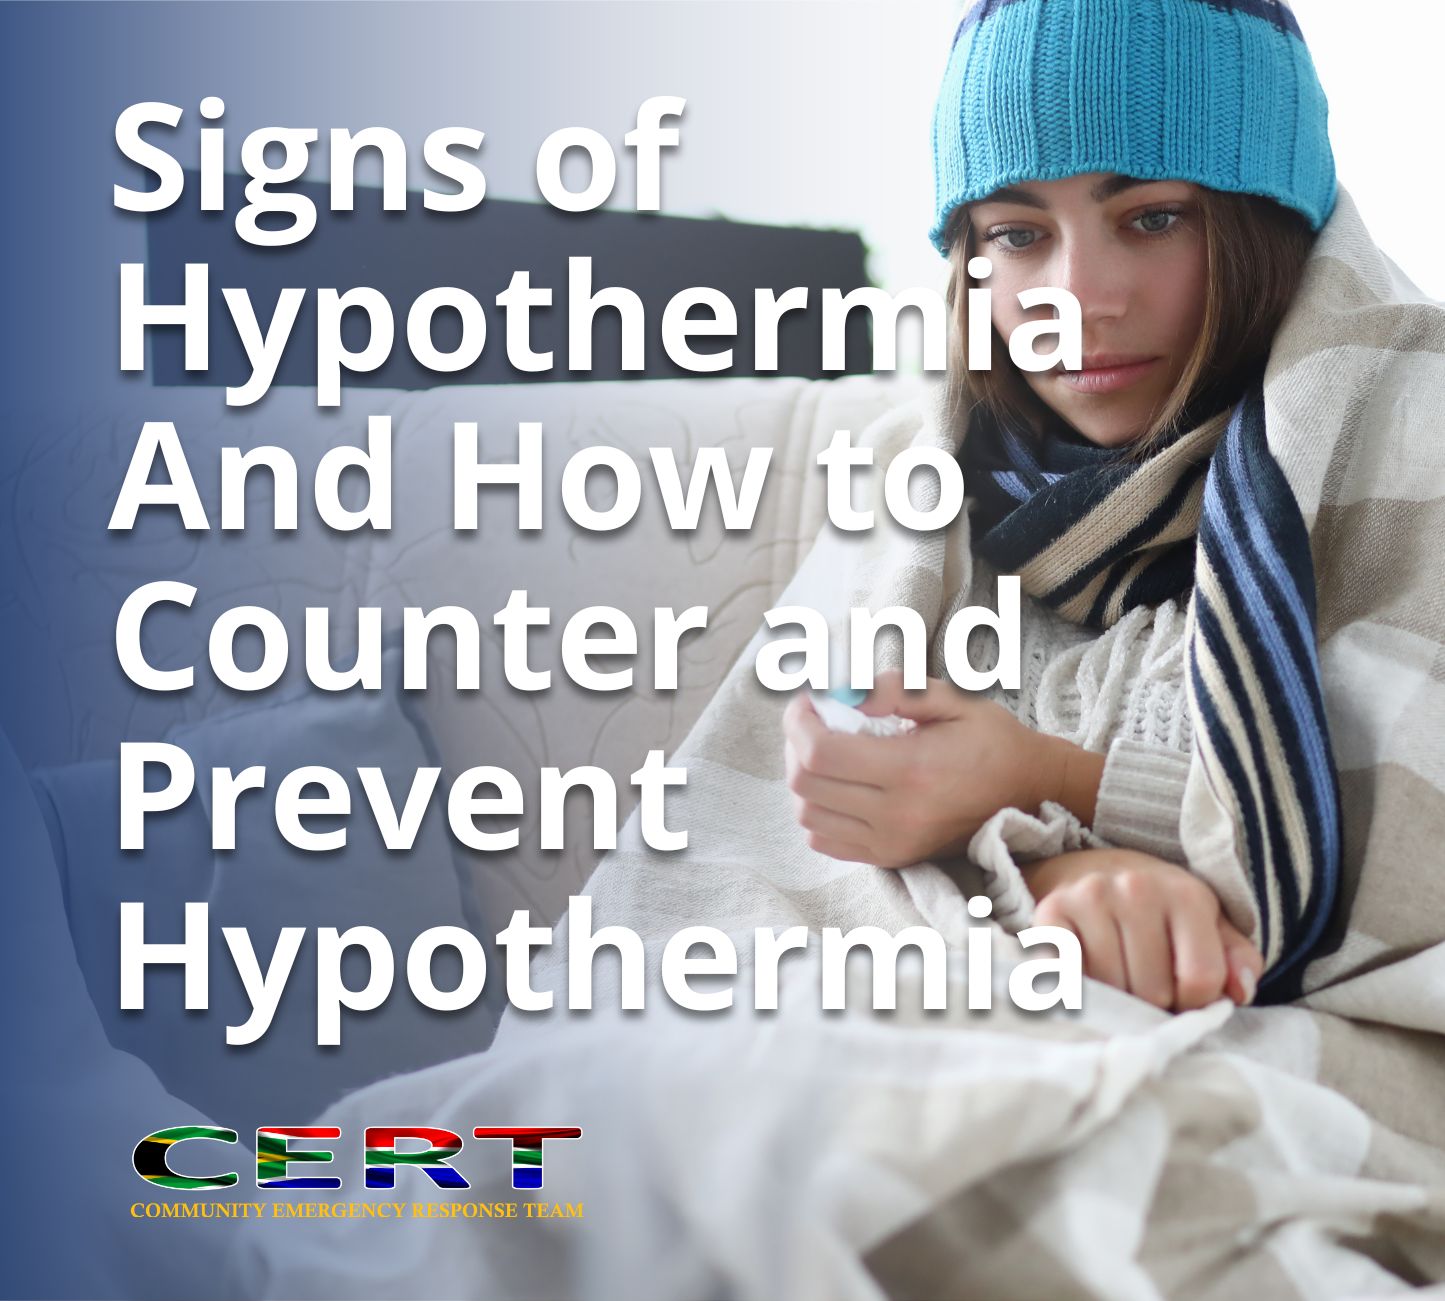 Know more about Hypothermia